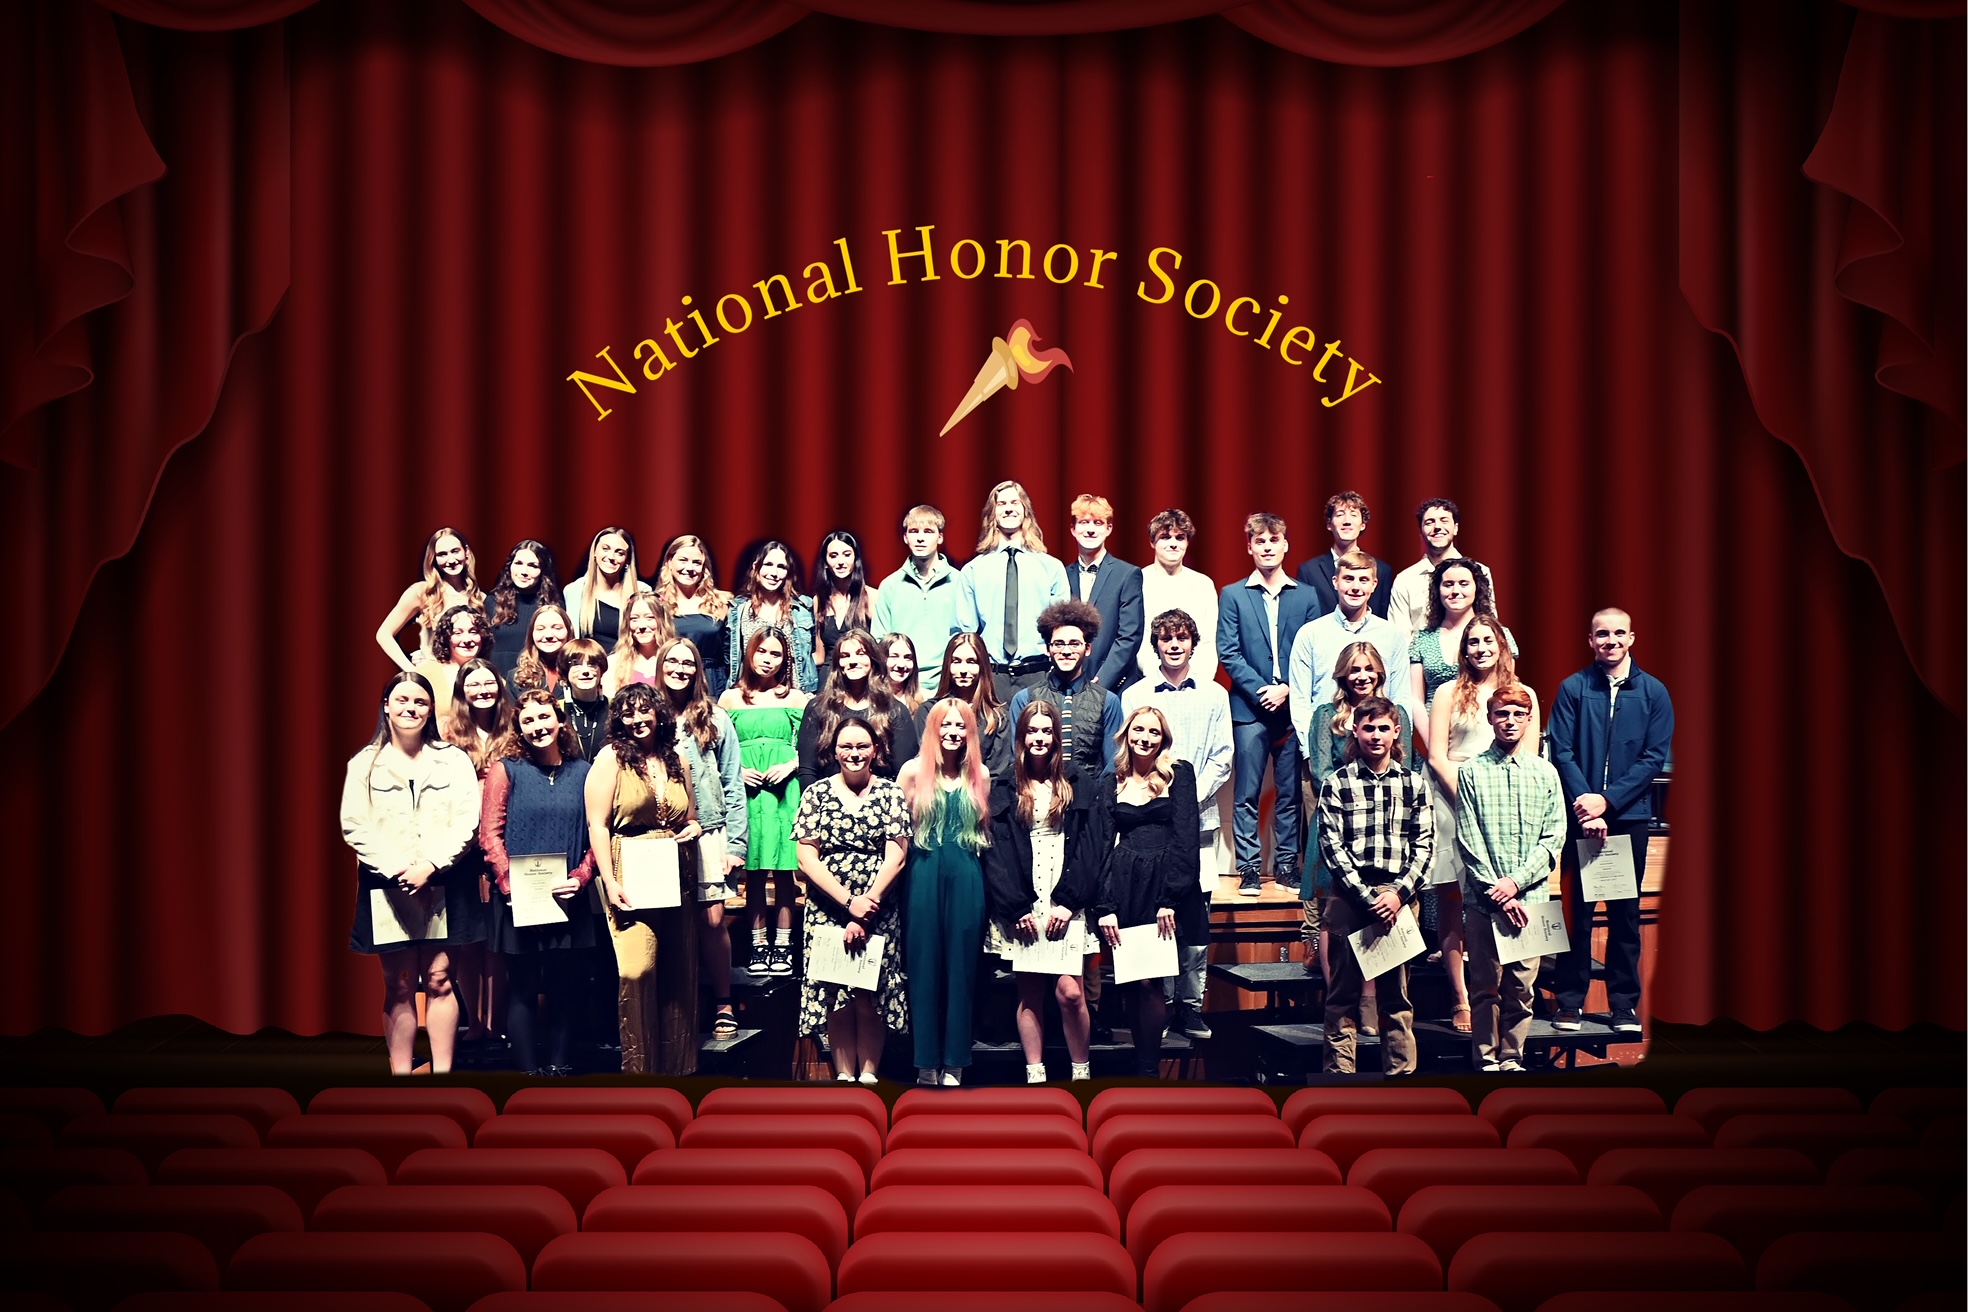 three rows of students standing in front of stage curtain with National Honor Society logo above them